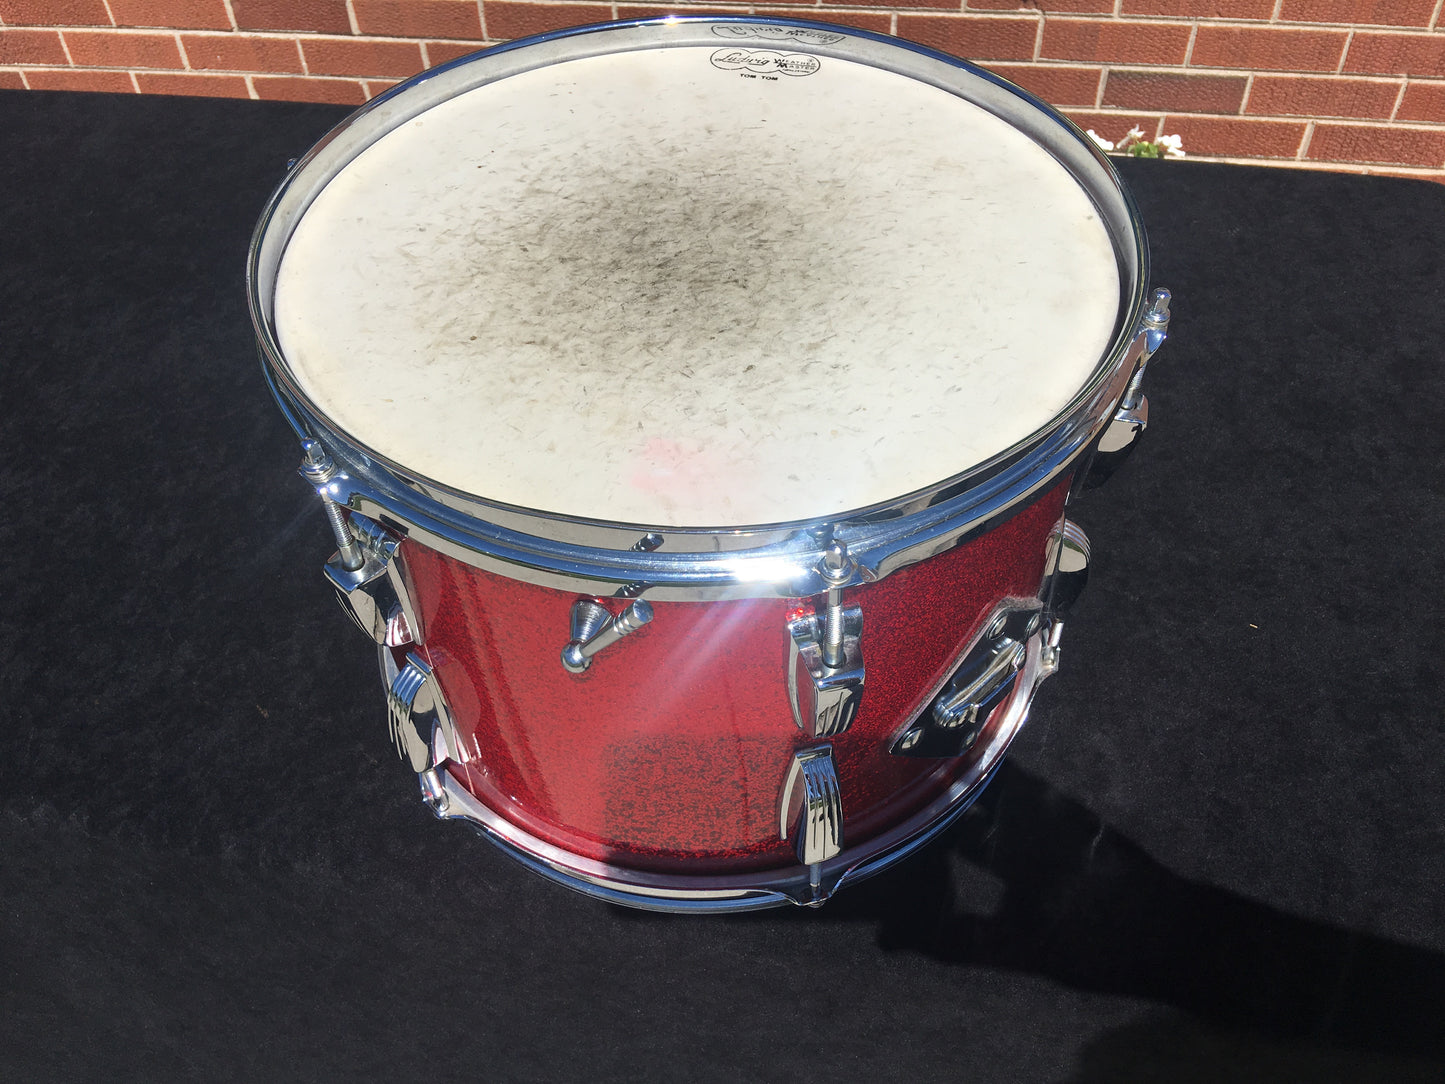 Vintage 1960s Ludwig 9"x13" Red Sparkle Super Classic Tom Drum - Stunning!